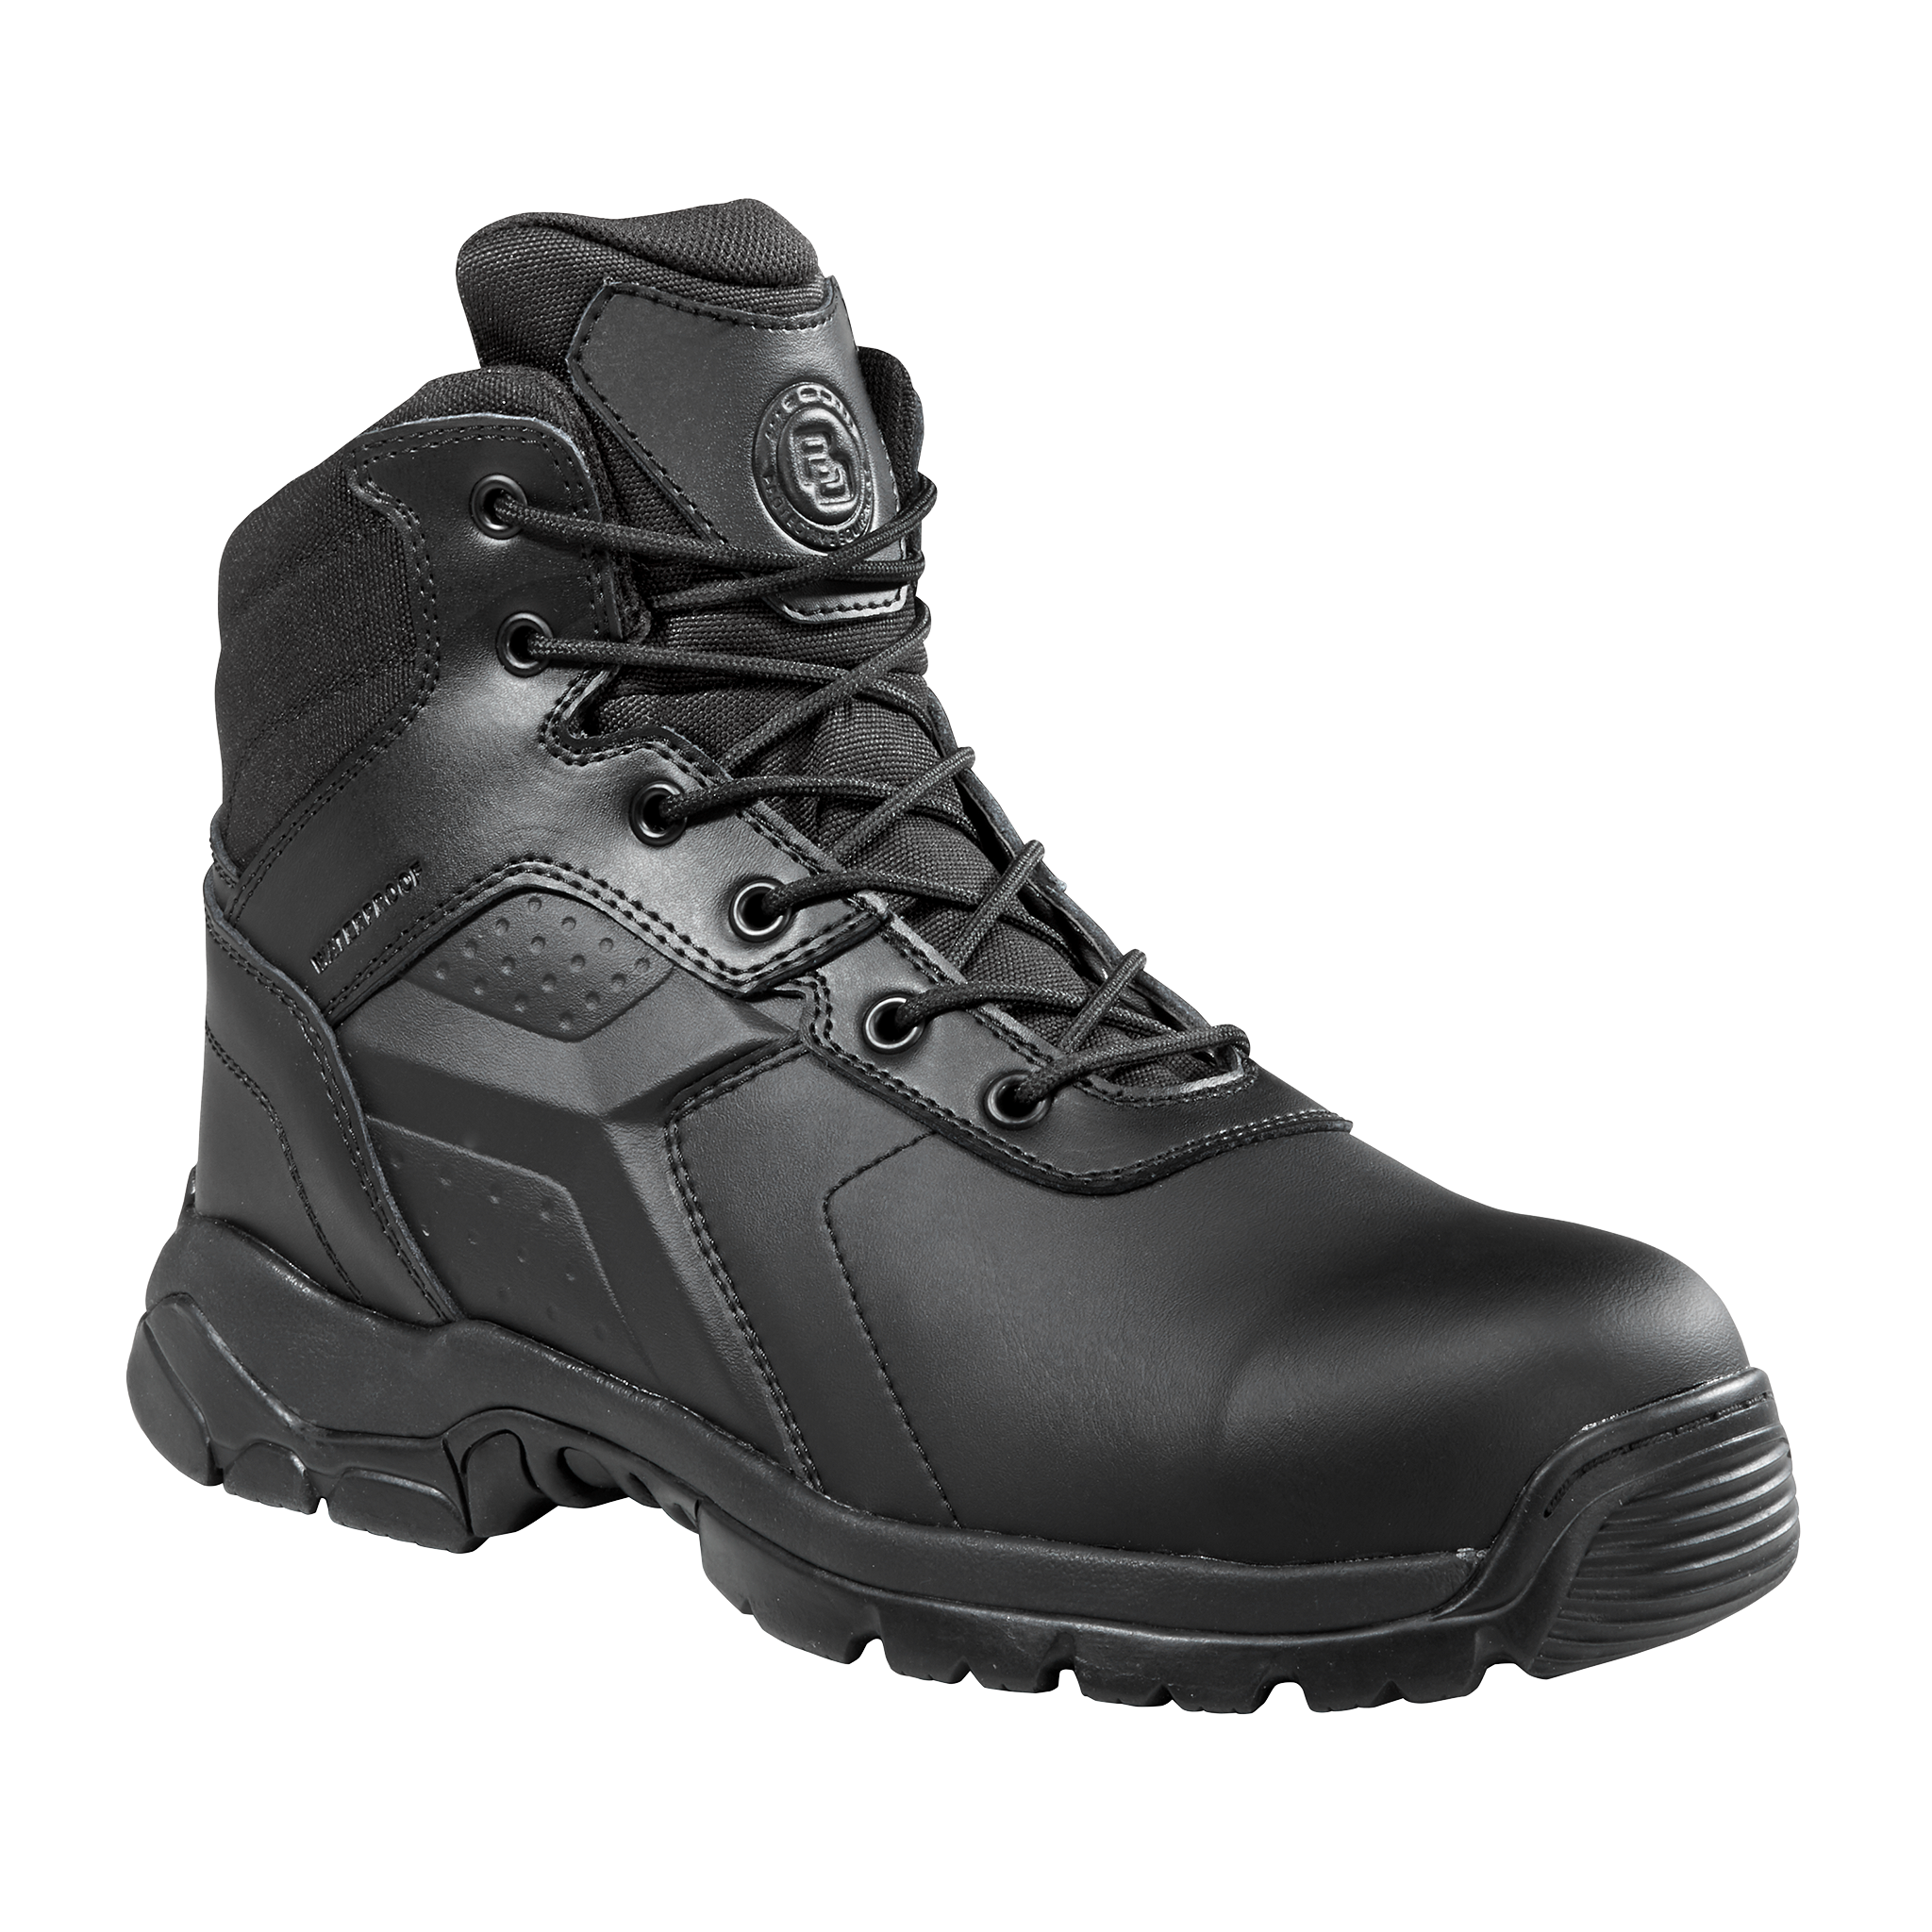 6-INCH WATERPROOF TACTICAL BOOT - SIDE ZIP  COMPOSITE SAFETY TOE